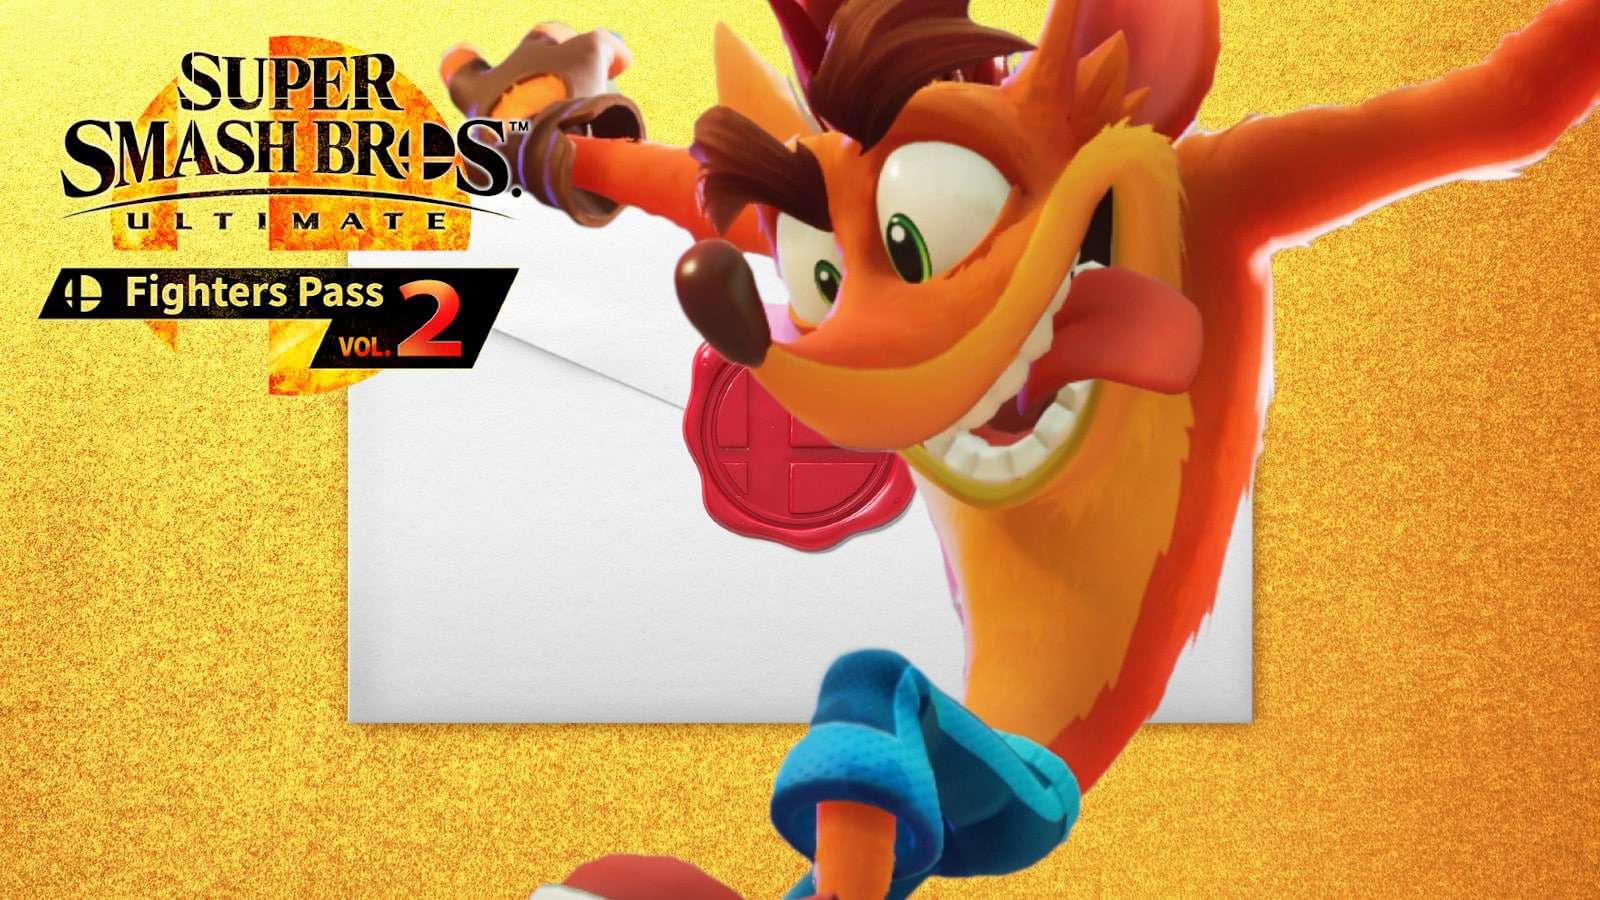 Crash Bandicoot joining Smash Ultimate in Fighters Pass Volume 2